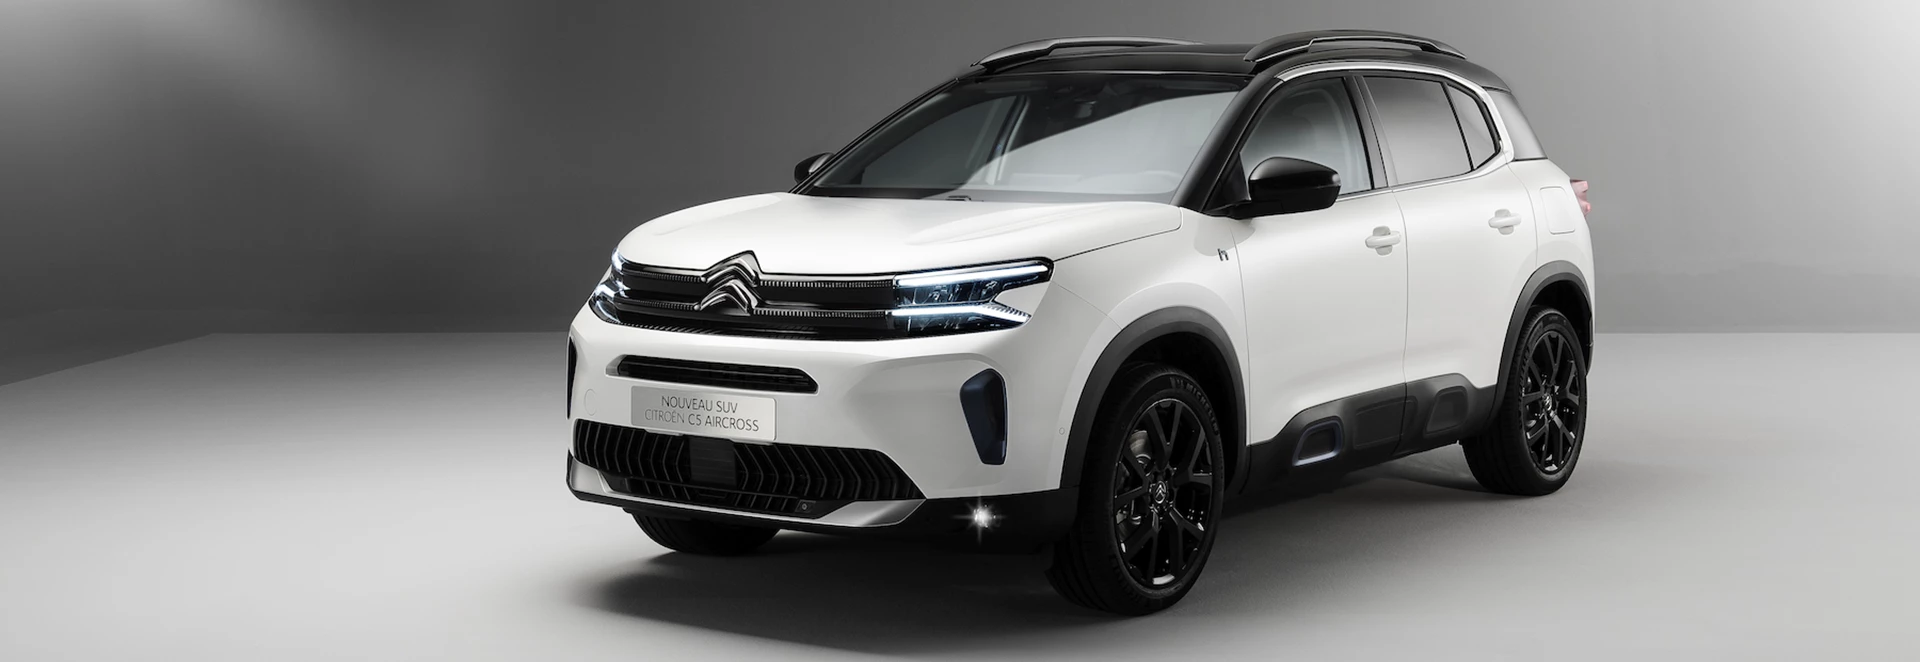 2022 Citroen C5 Aircross: What’s changed? 